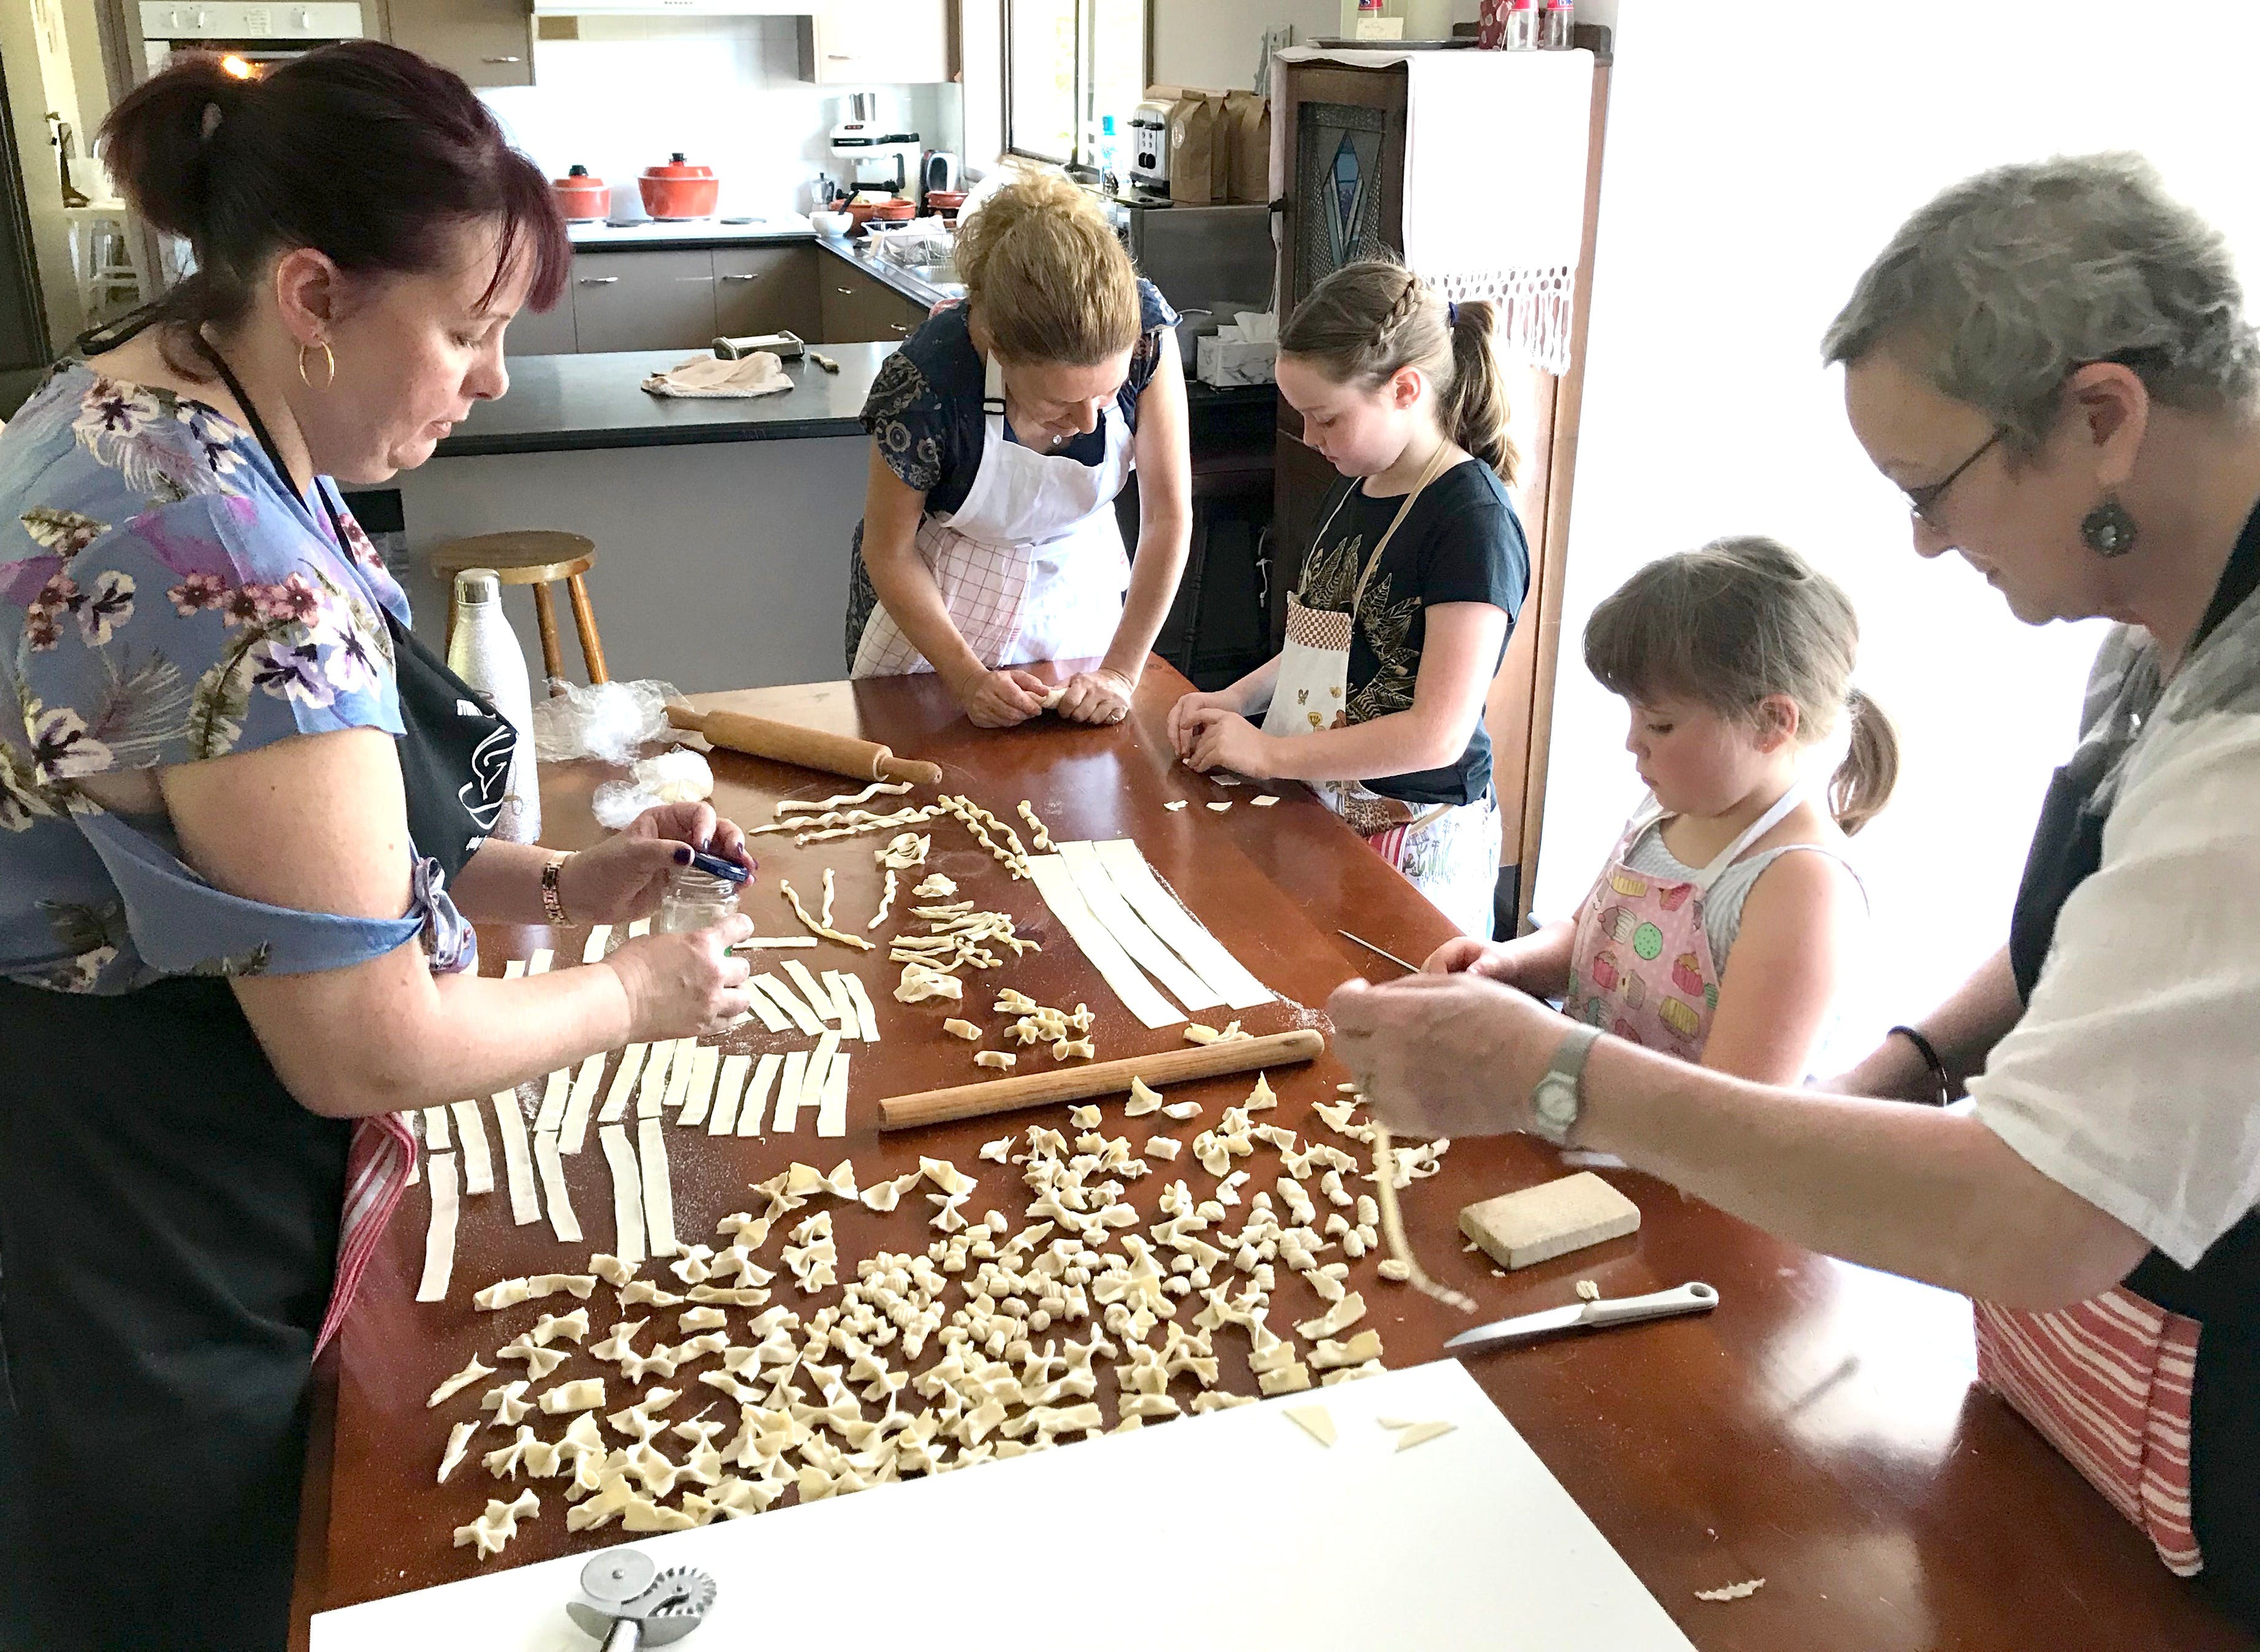 Kids Pasta Making Class - hands on fun at your house - Townsville Tourism